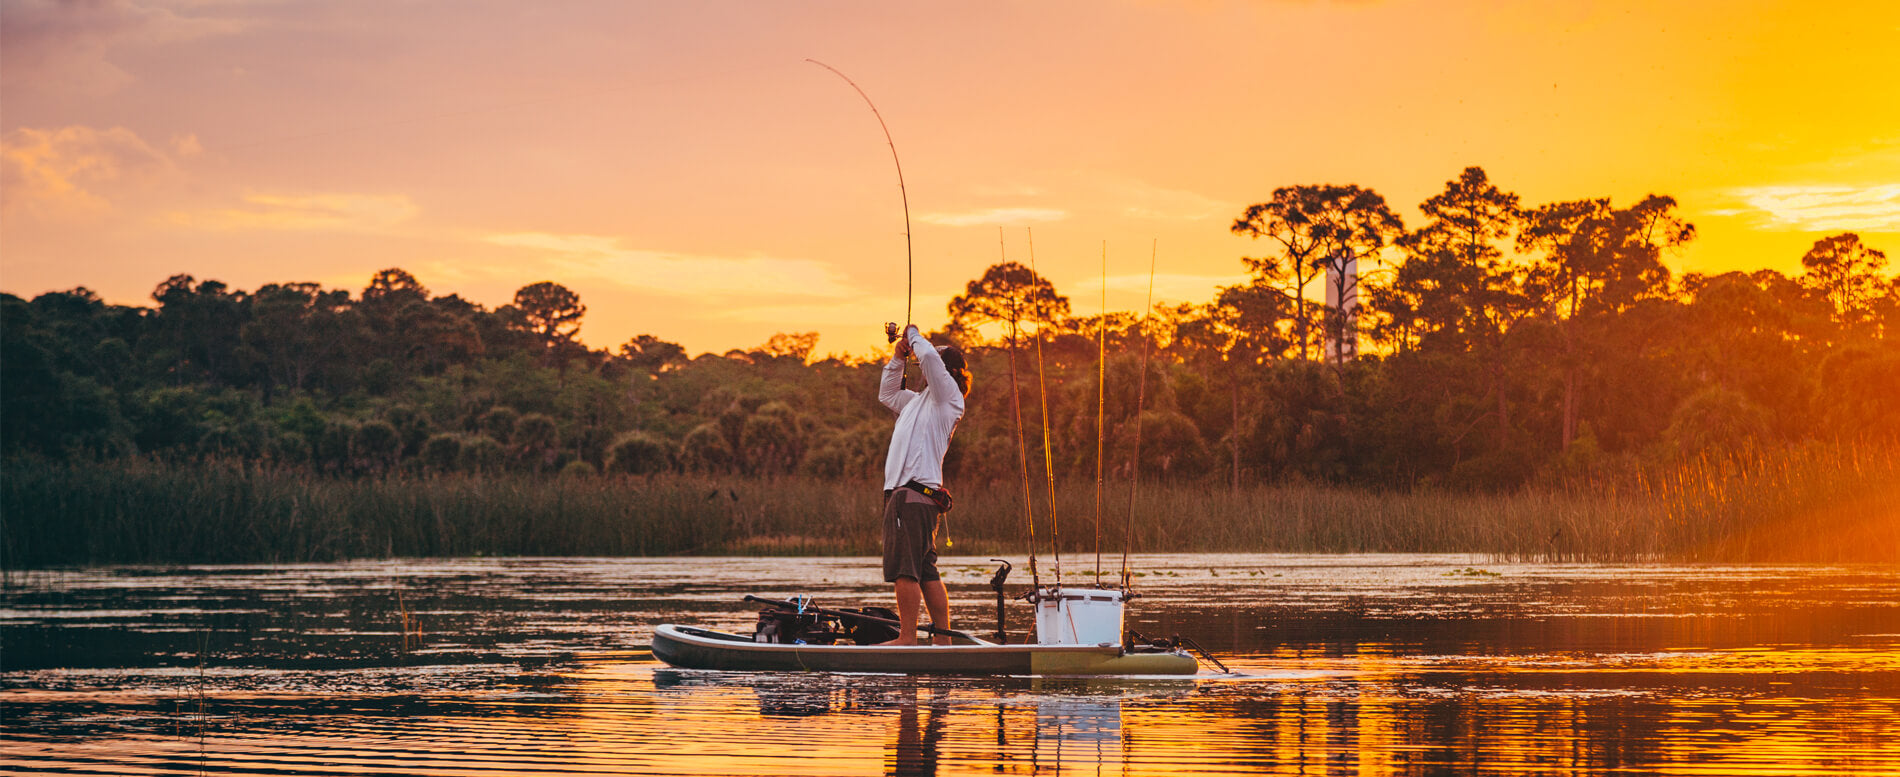 The Best Paddle Board Fishing Accessories - Gili Sports UK